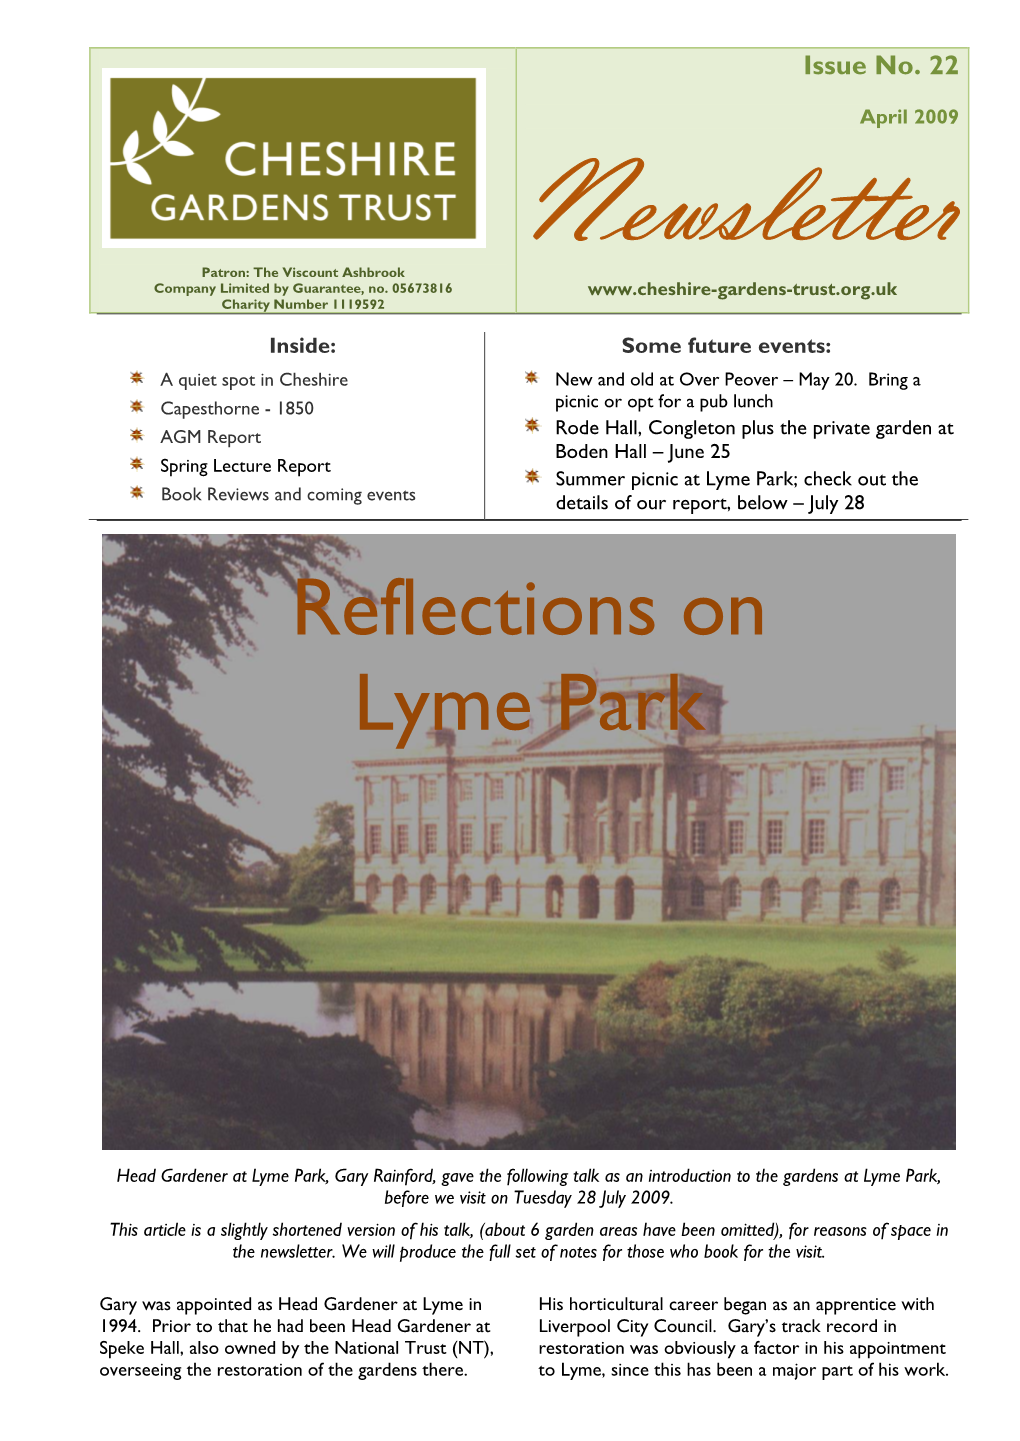 Reflections on Lyme Park